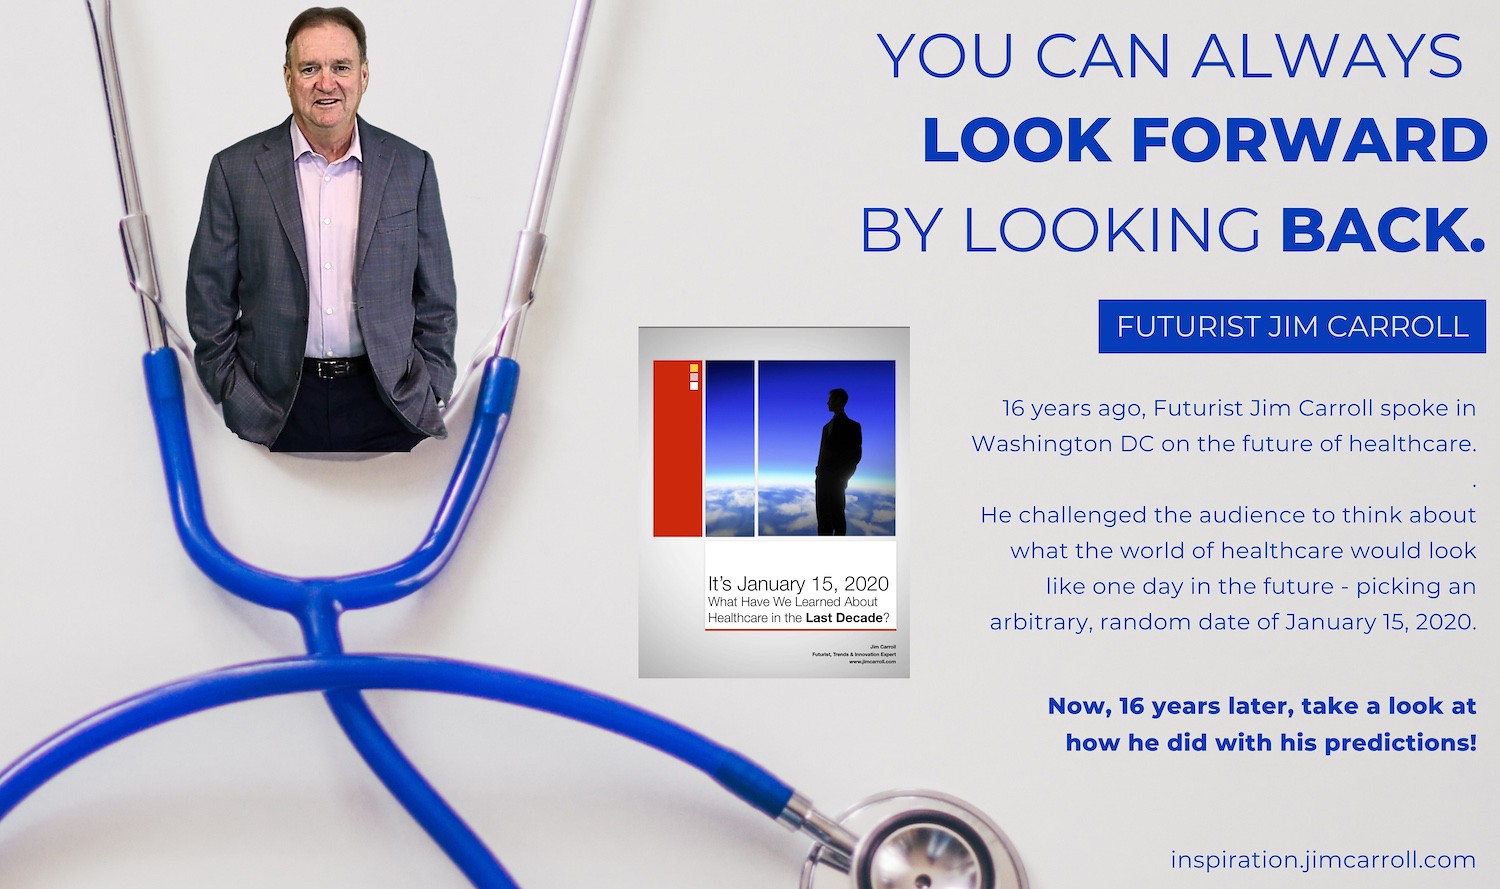 "You can always look forward by looking back!" - Futurist Jim Carroll